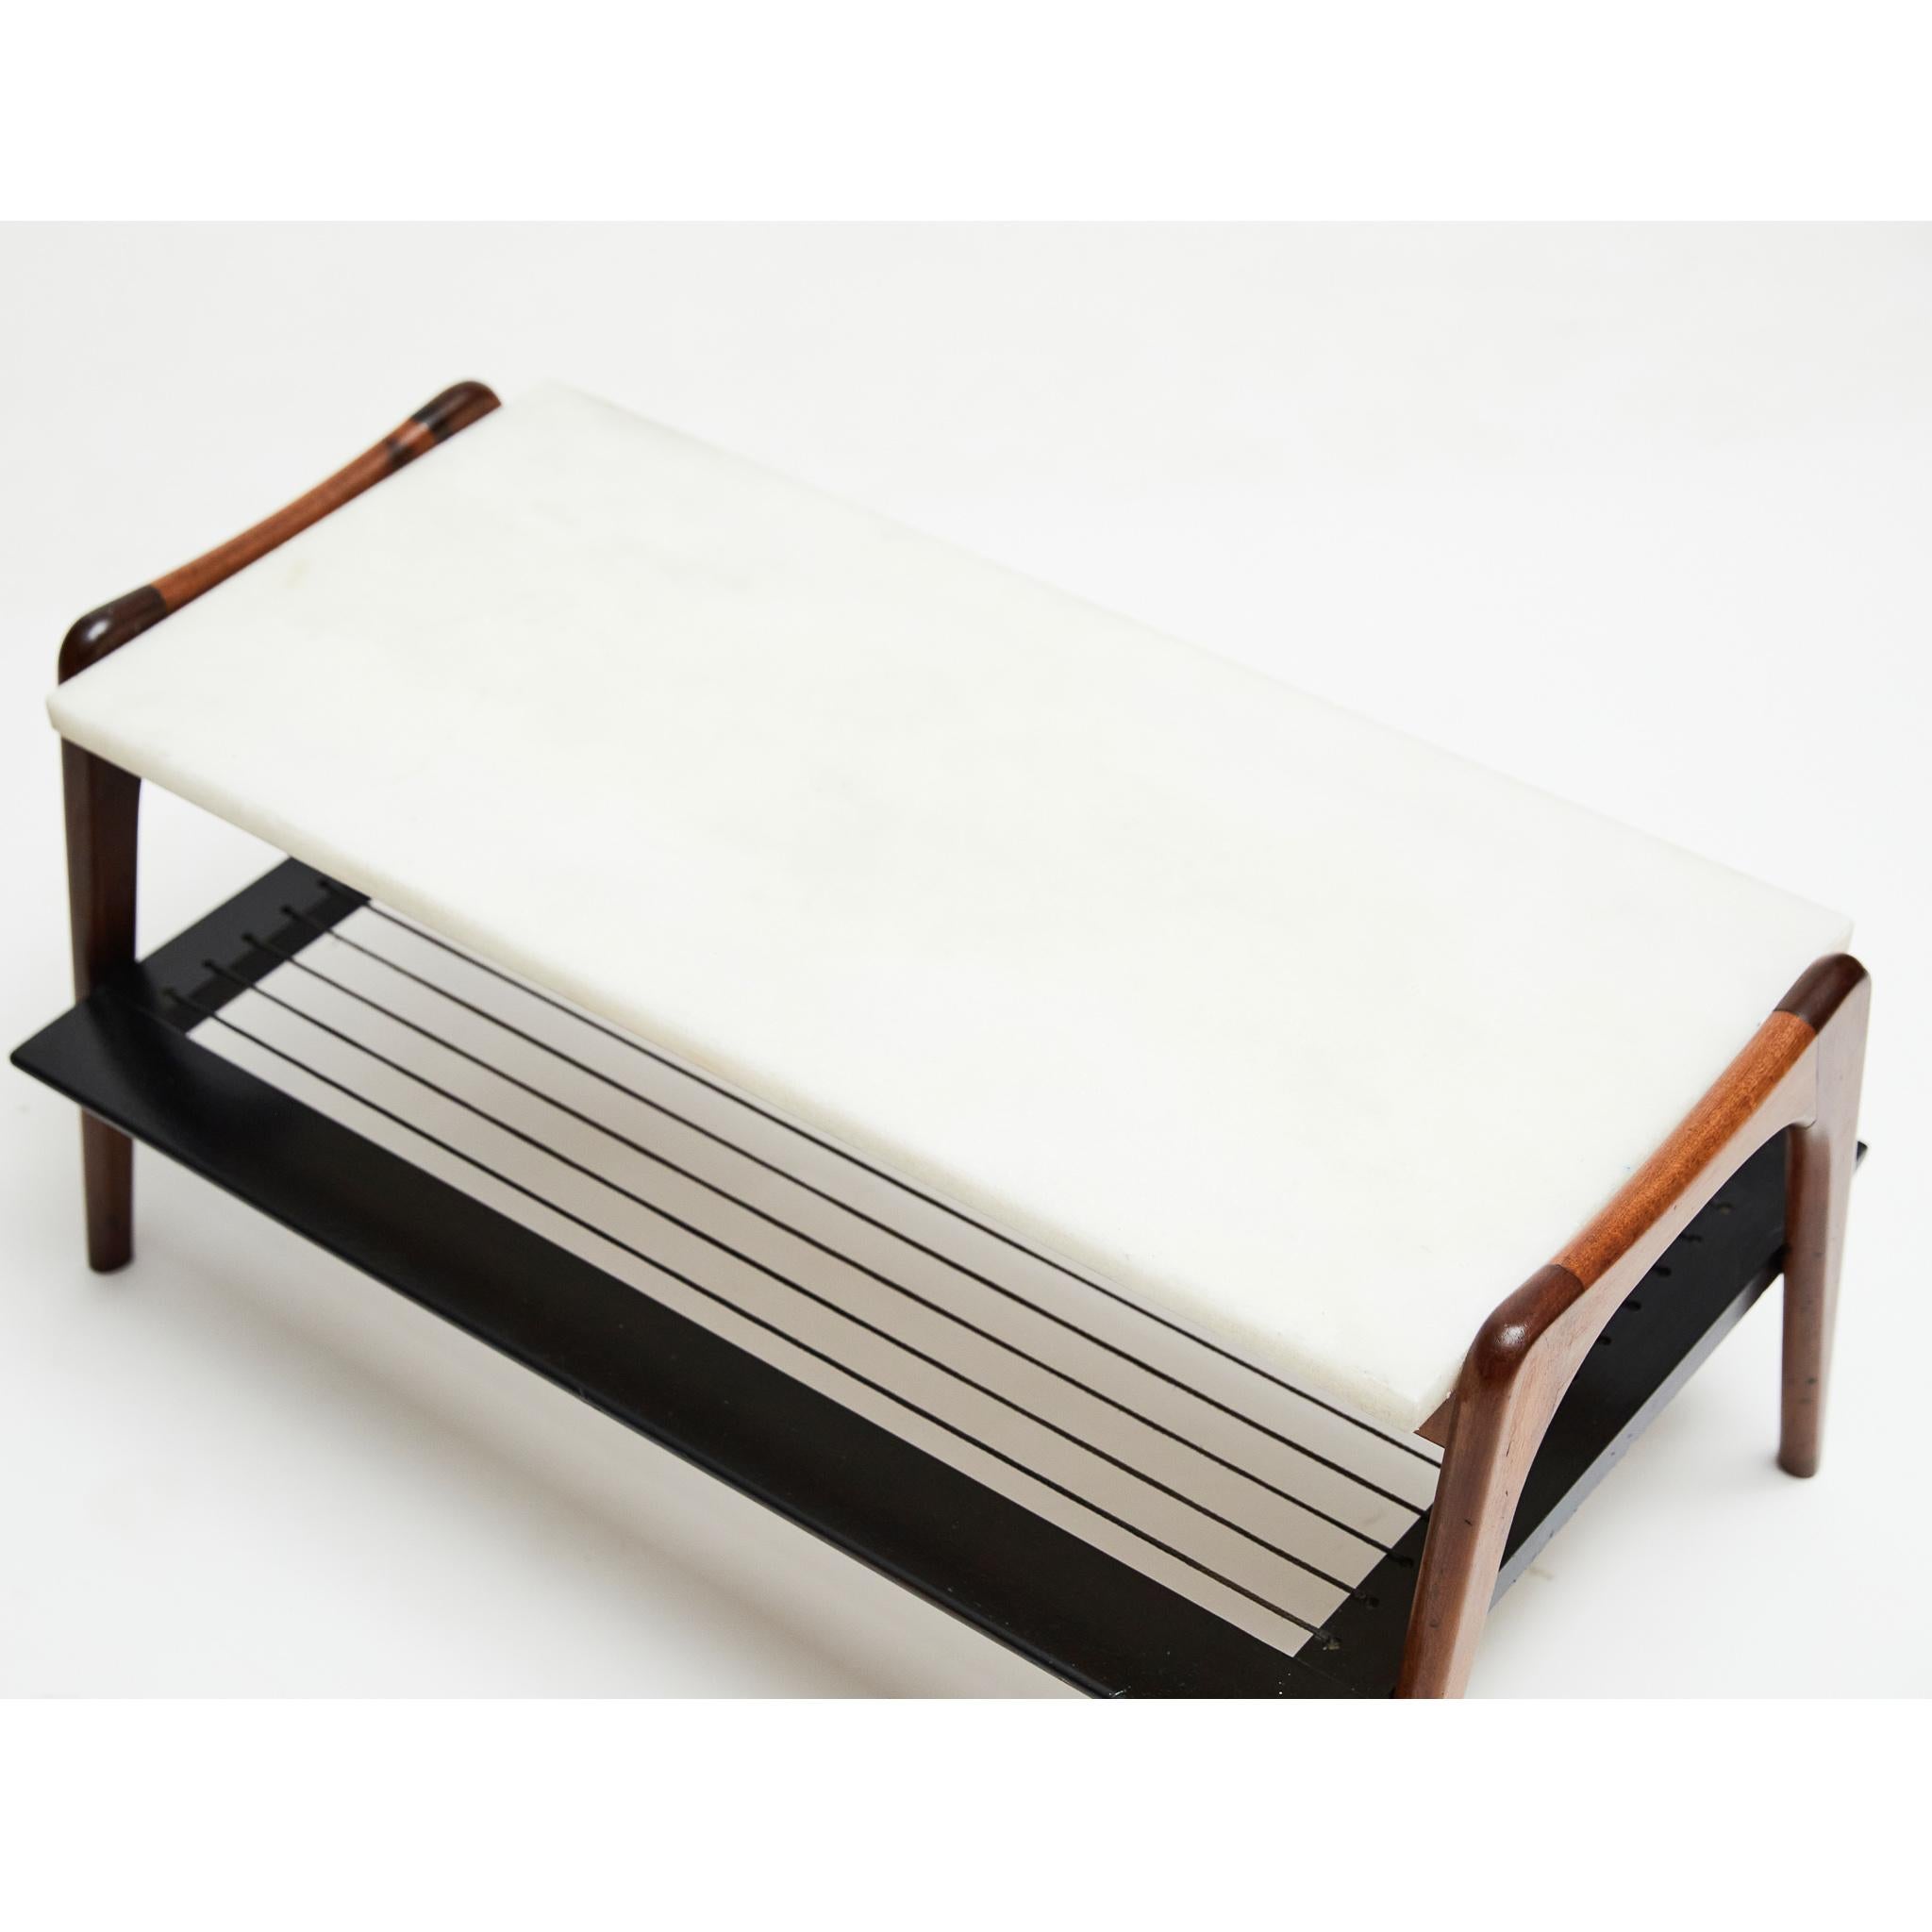 Brazilian Modern Coffee Table in Hardwood & Marble by Moveis Bergamo, 1950’s For Sale 2